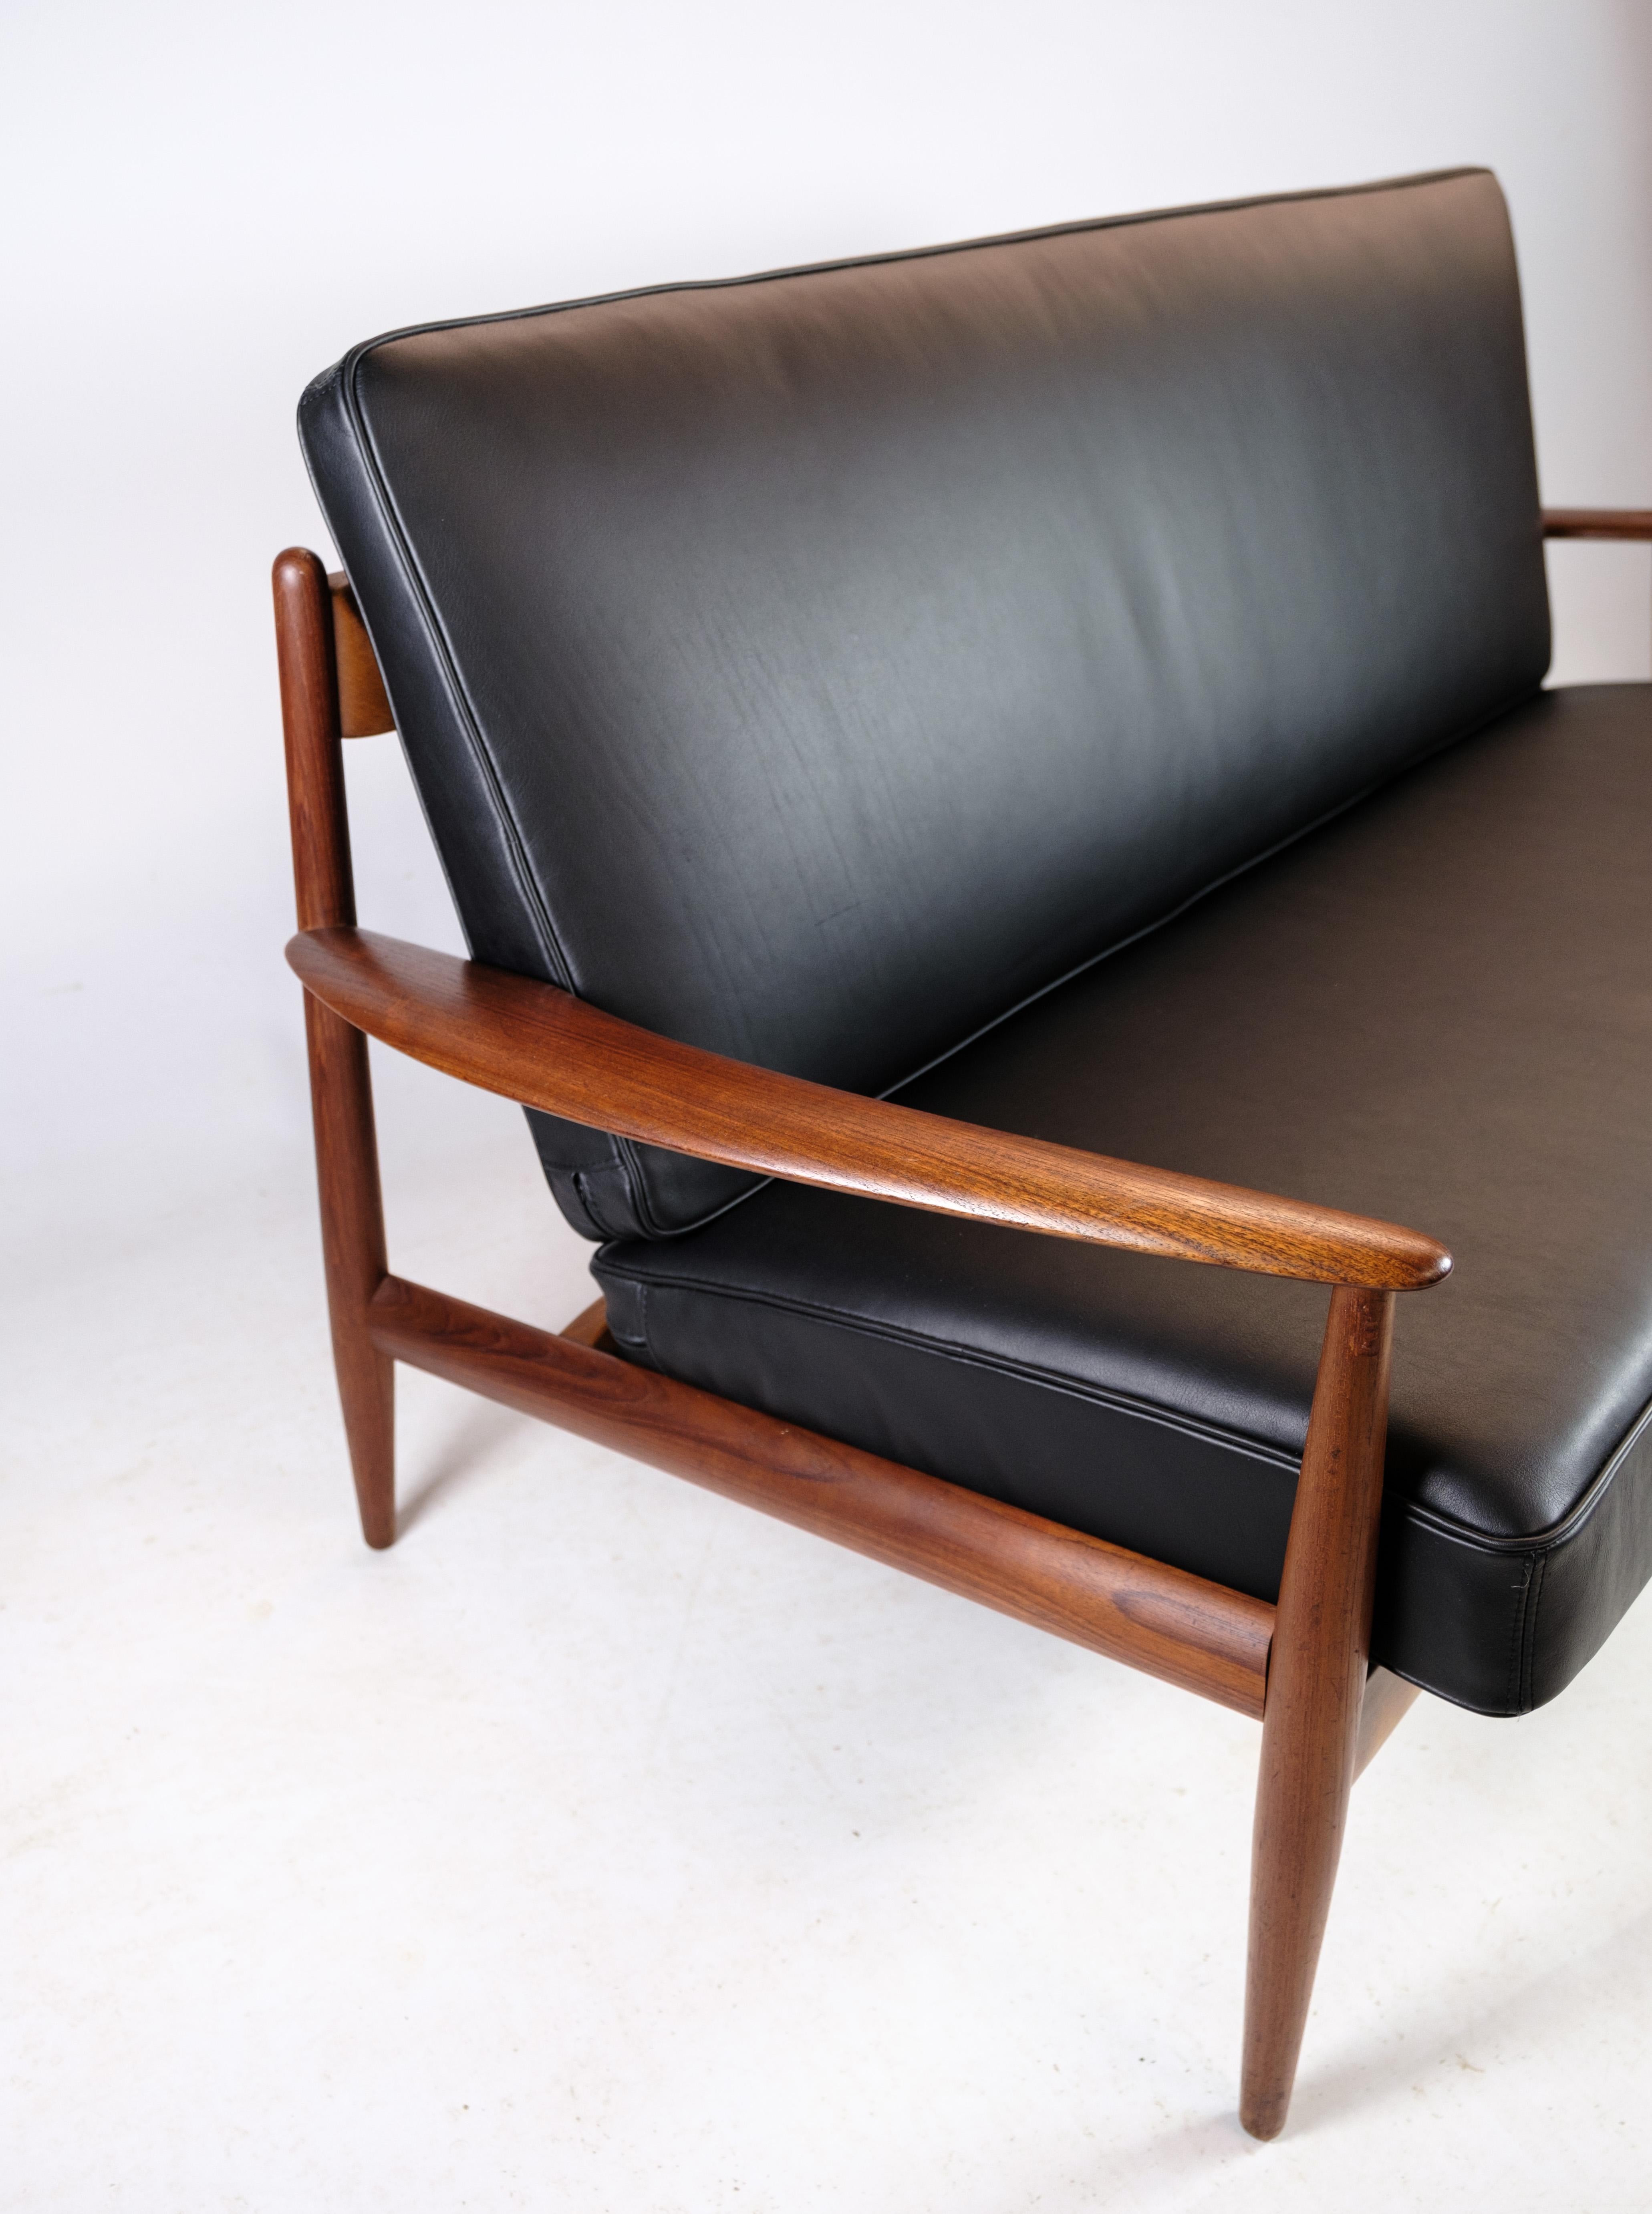 2 Seater Sofa Model 118 Made With a Teak Frame By Grete Jalk From 1960s For Sale 8